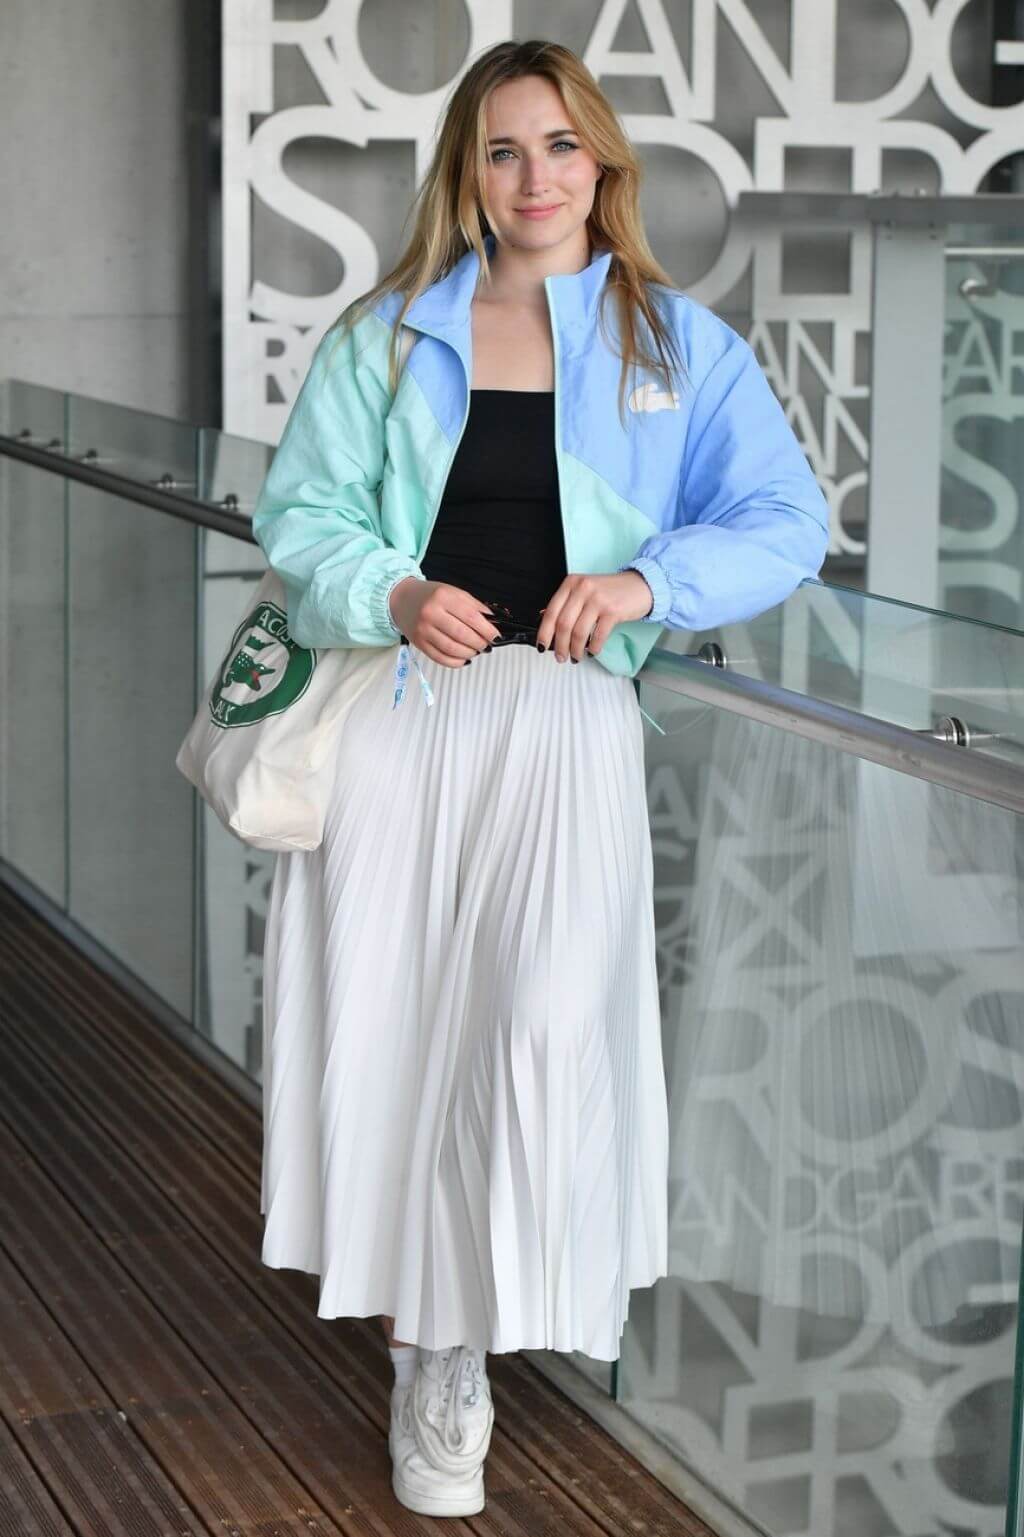 Chloé Jouannet In a Dual Shade Of Baggy Jacket Under Black Top With White Pleated Long Skirt Outfits